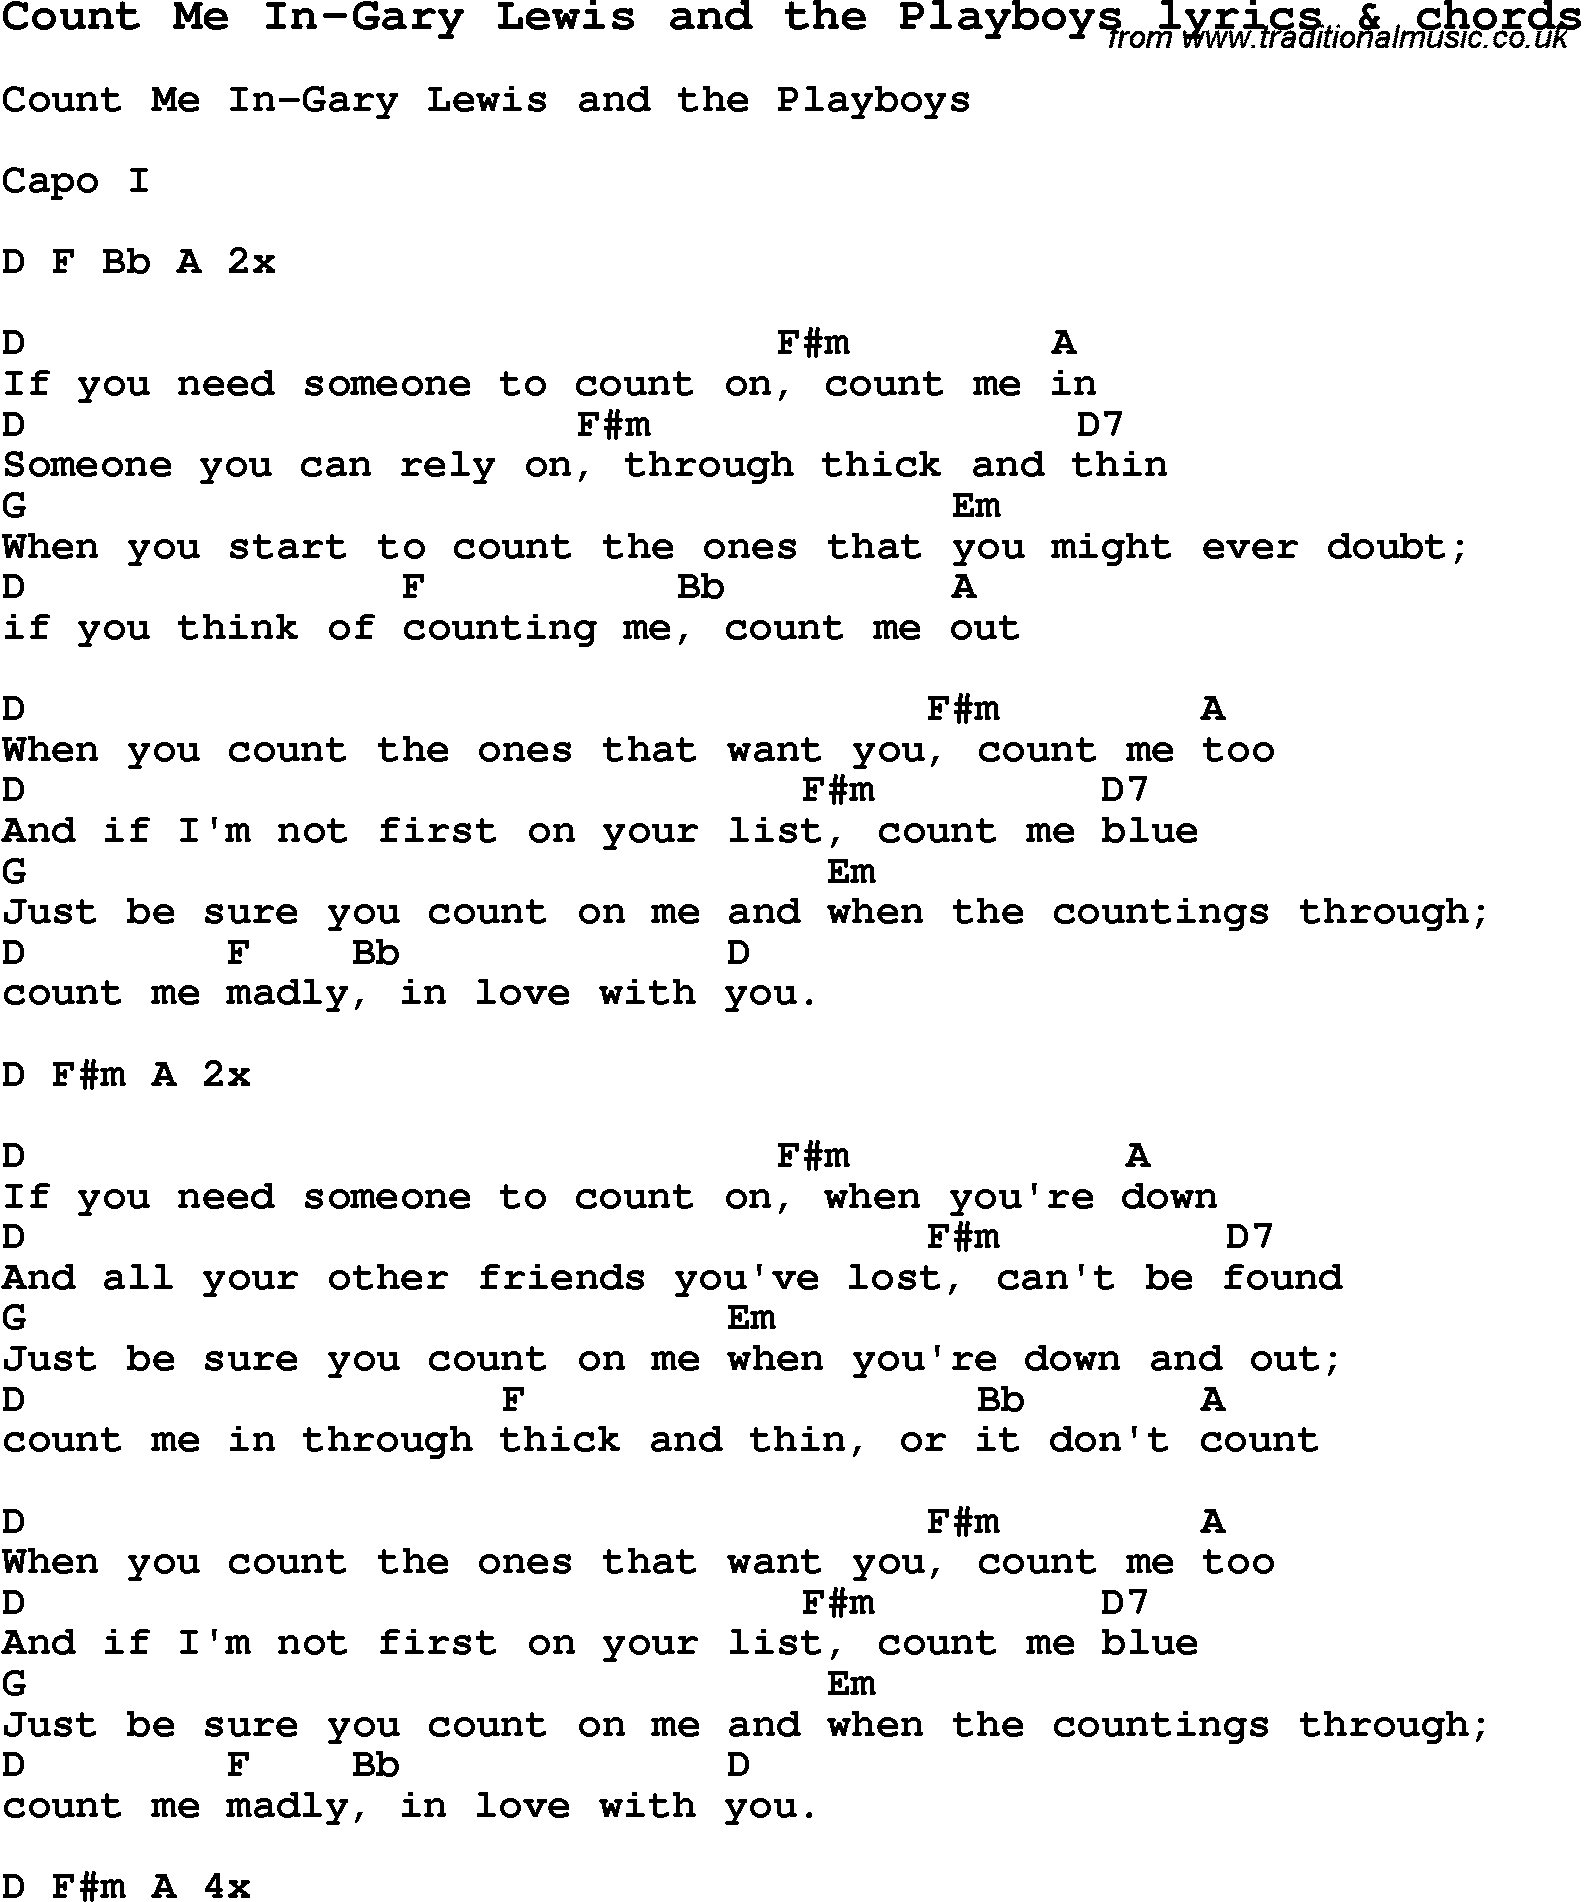 Count On Me Chords Love Song Lyrics Forcount Me In Gary Lewis And The Playboys With